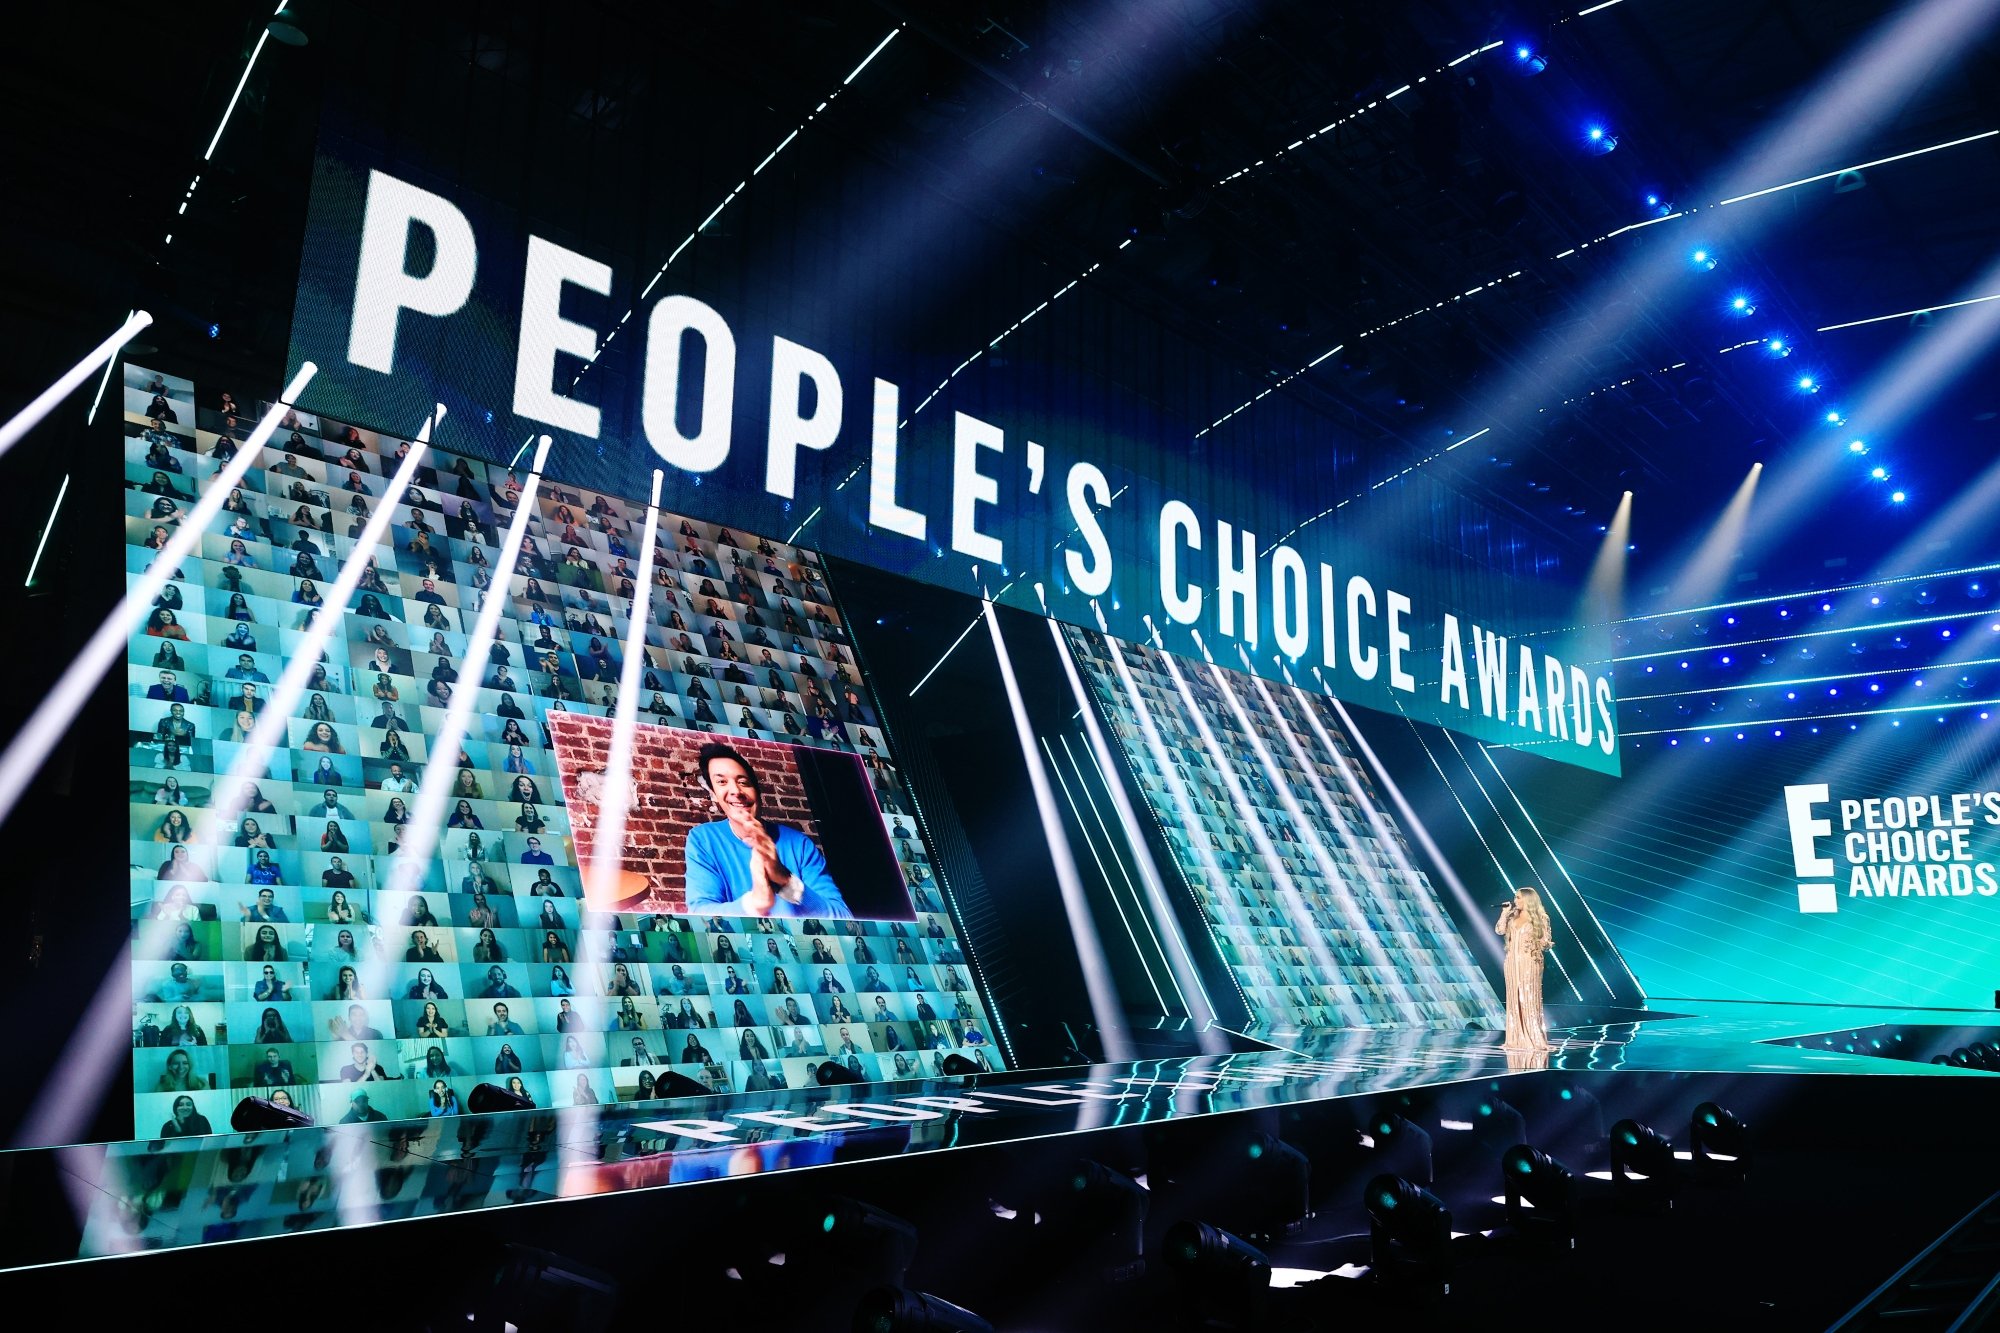 People's Choice Awards movie nominees picture including Jimmy Fallon and Demi Lovato on the stage in 2020